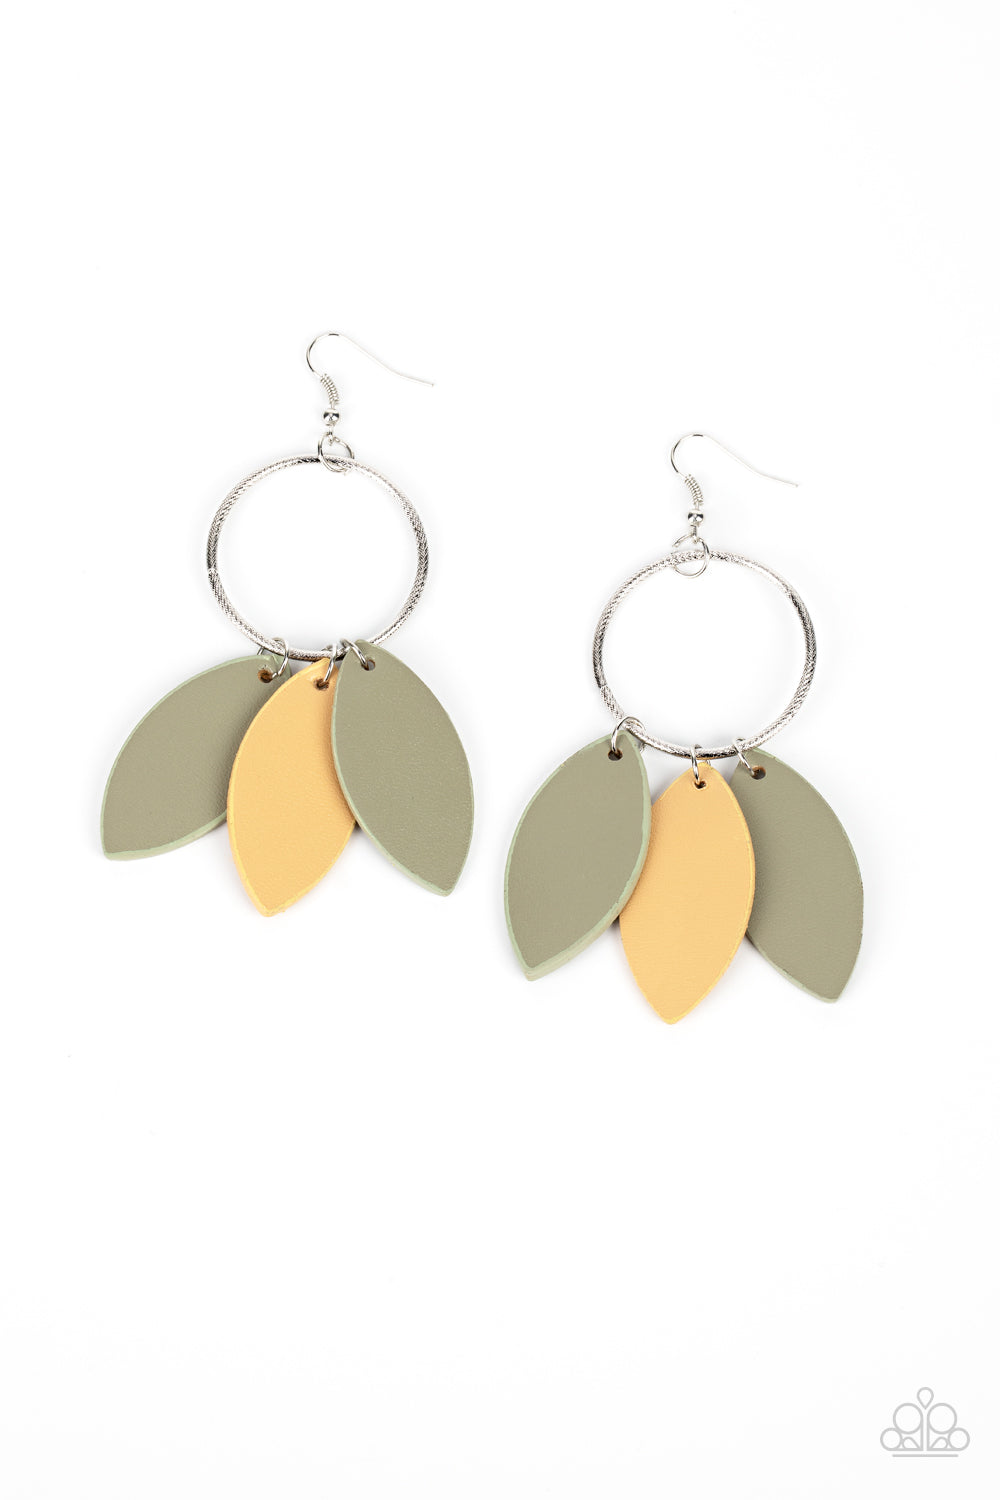 Leafy Laguna - Multi Leather Earrings leafy green and tan leather frames swing from the bottom of a textured silver hoop, creating an earthy fringe. Earring attaches to a standard fishhook fitting.  Sold as one pair of earrings.